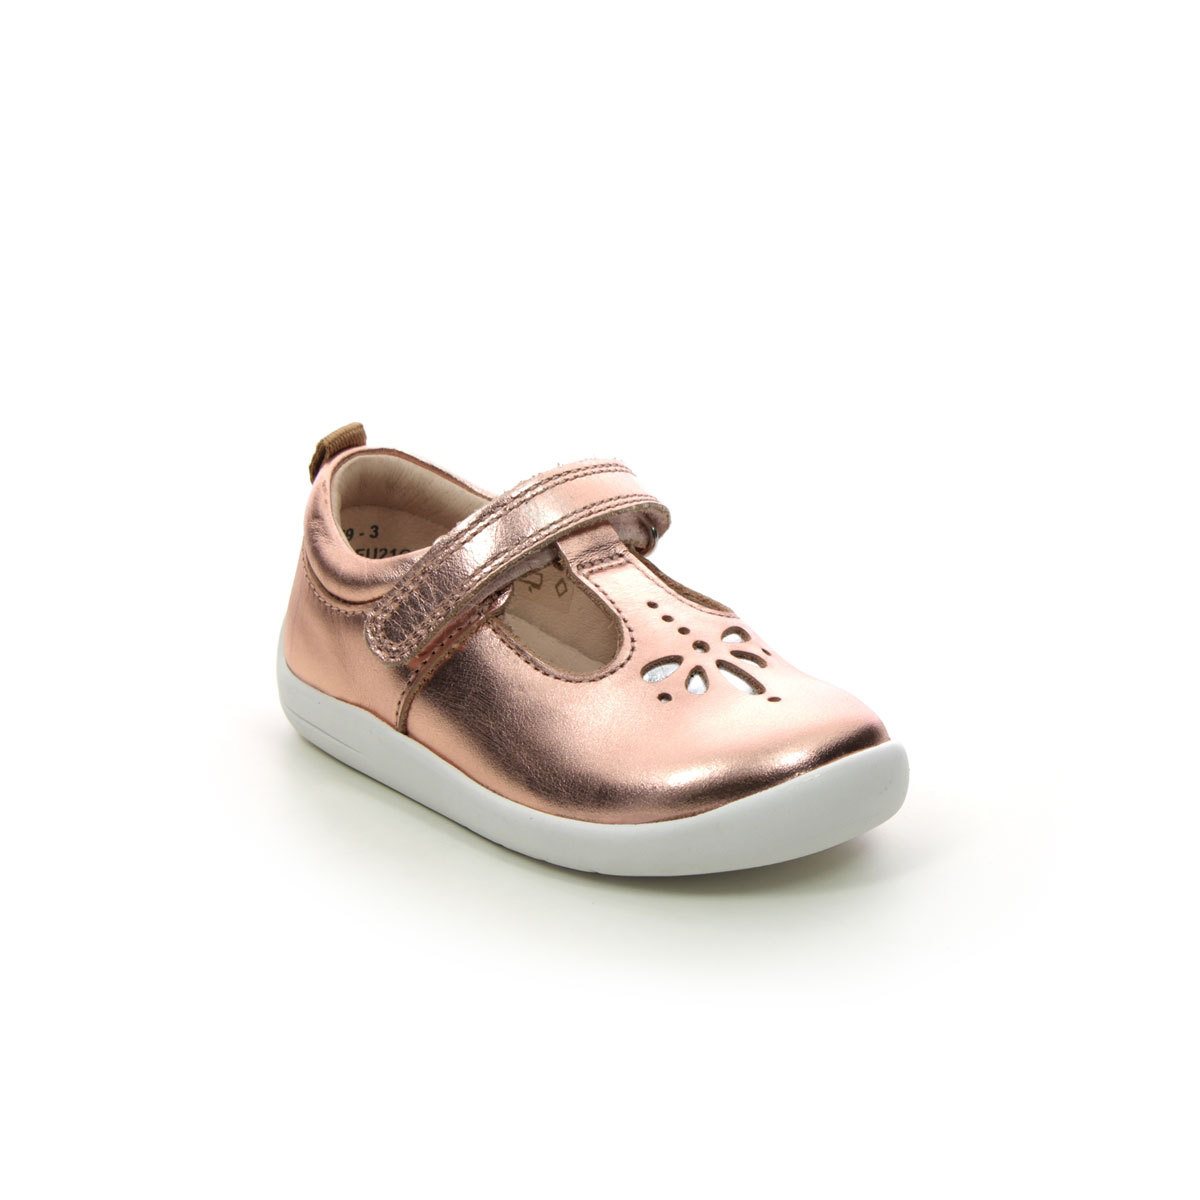 Start Rite Puzzle Rose Gold Kids first shoes 0779-36F in a Plain Leather in Size 6.5